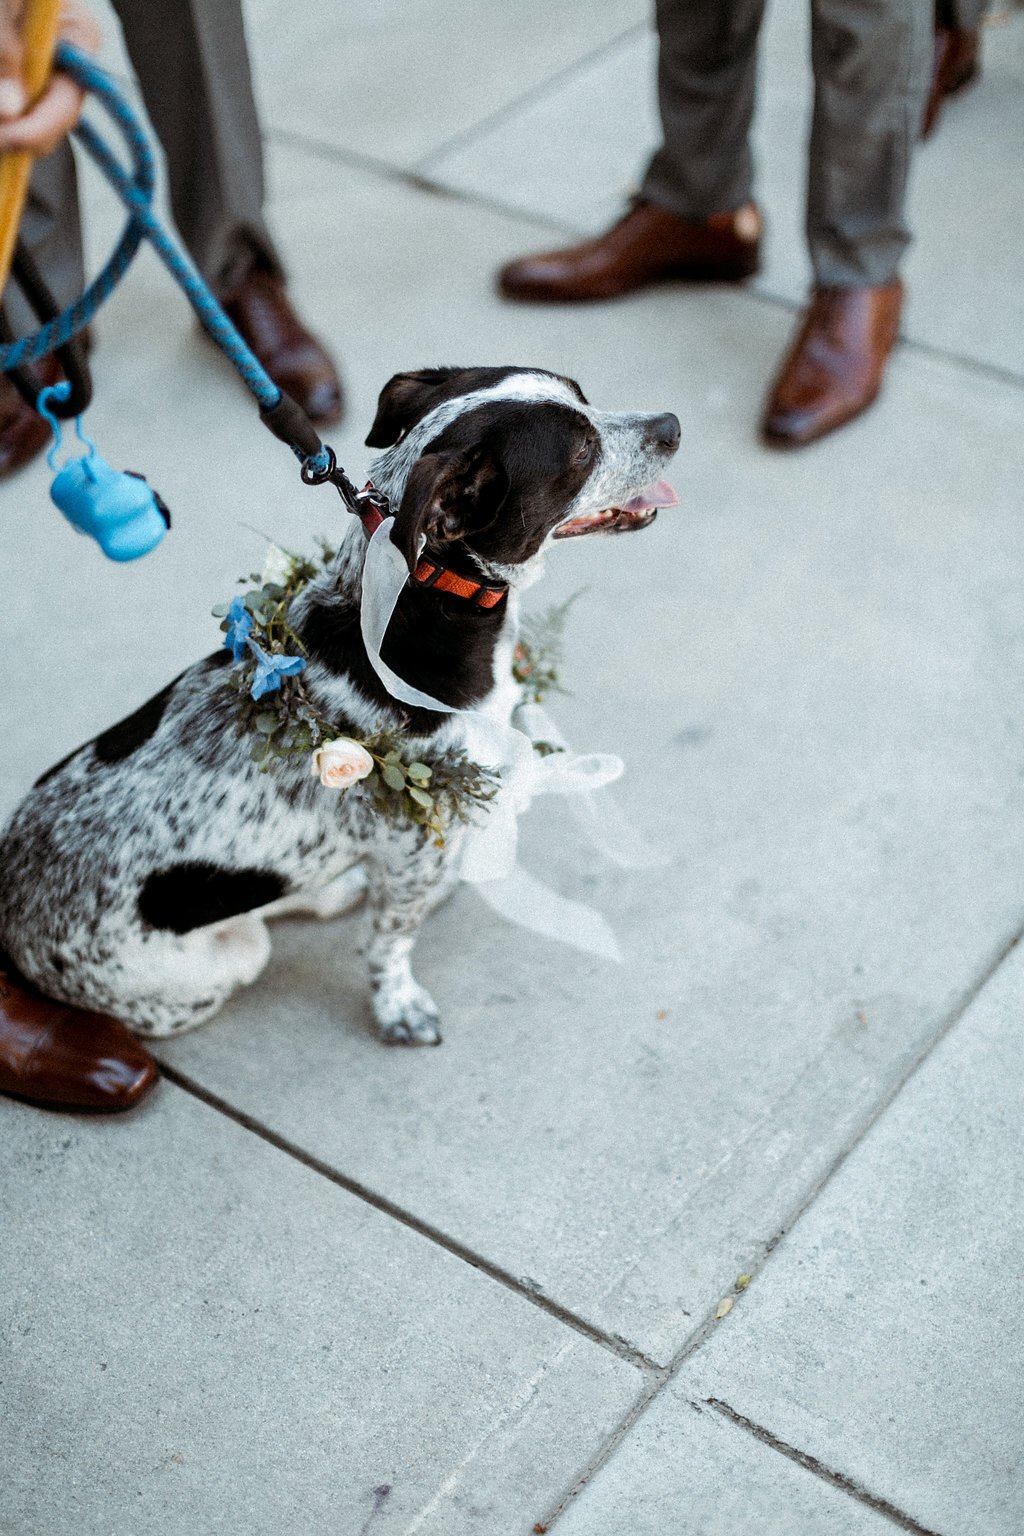 www.santabarbarawedding.com | Abi Q Photography | Camarillo Ranch | White Blossom | Unique Floral Designs | Bride and Groom’s Dog with a Flower Necklace